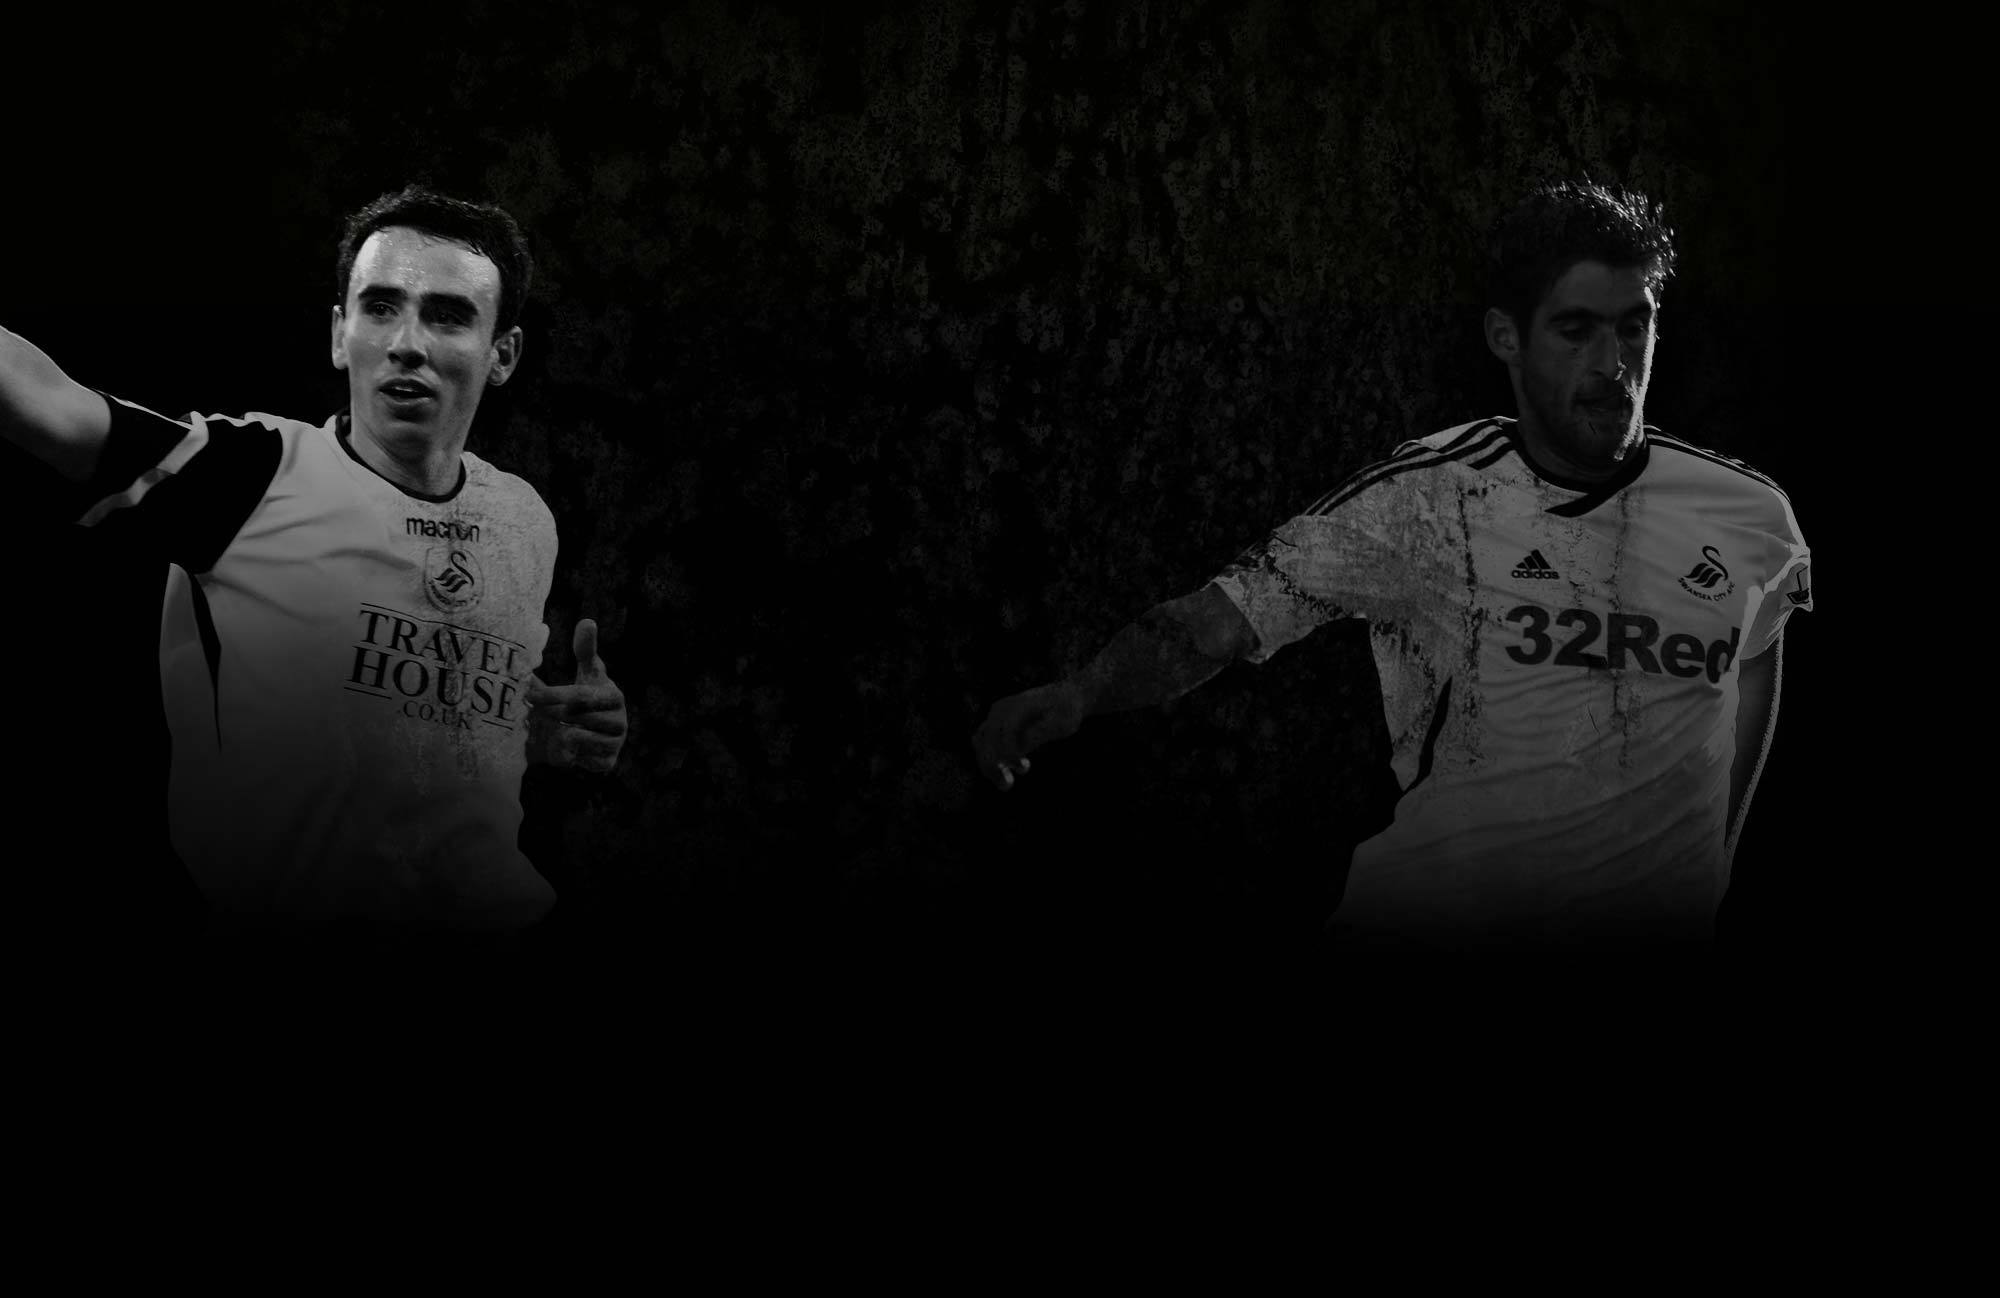 Best Football club of england Swansea City wallpapers and images